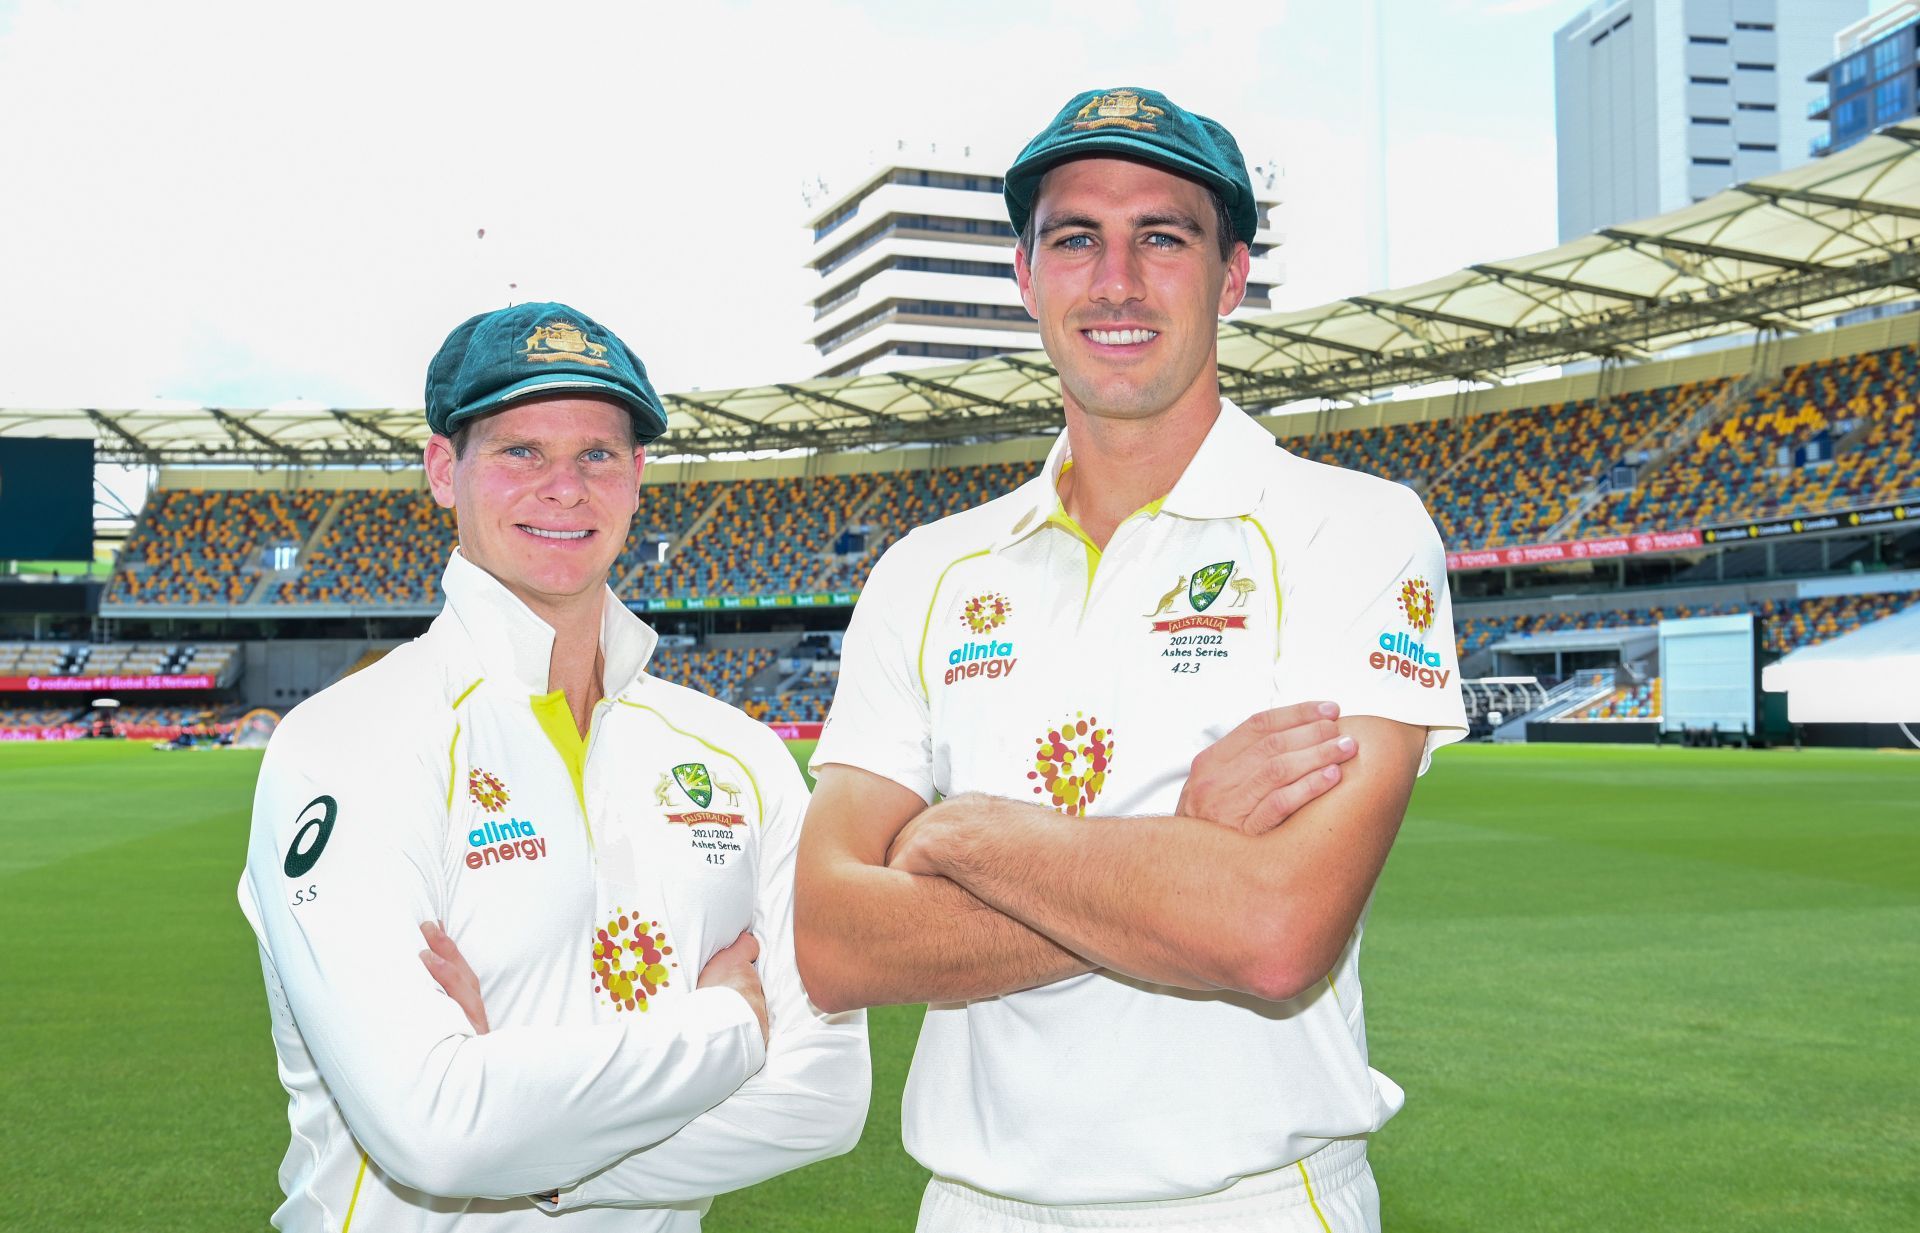 Pat Cummins and Steve Smith were appointed as the Test captain and the vice-captain respectively.